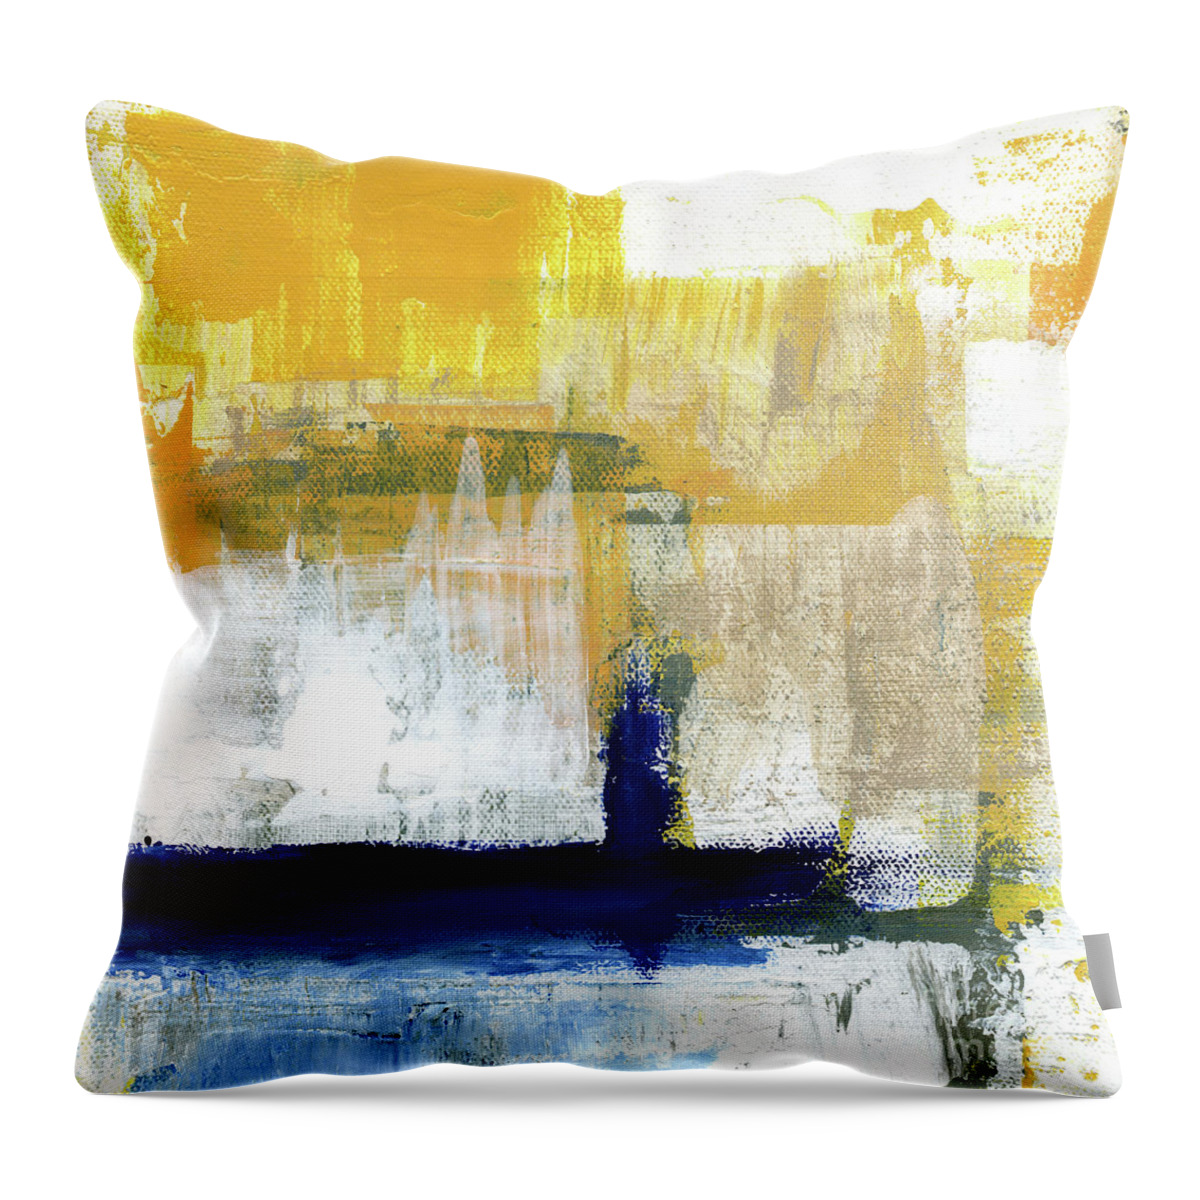 Abstract Throw Pillow featuring the painting Light Of Day 4 by Linda Woods